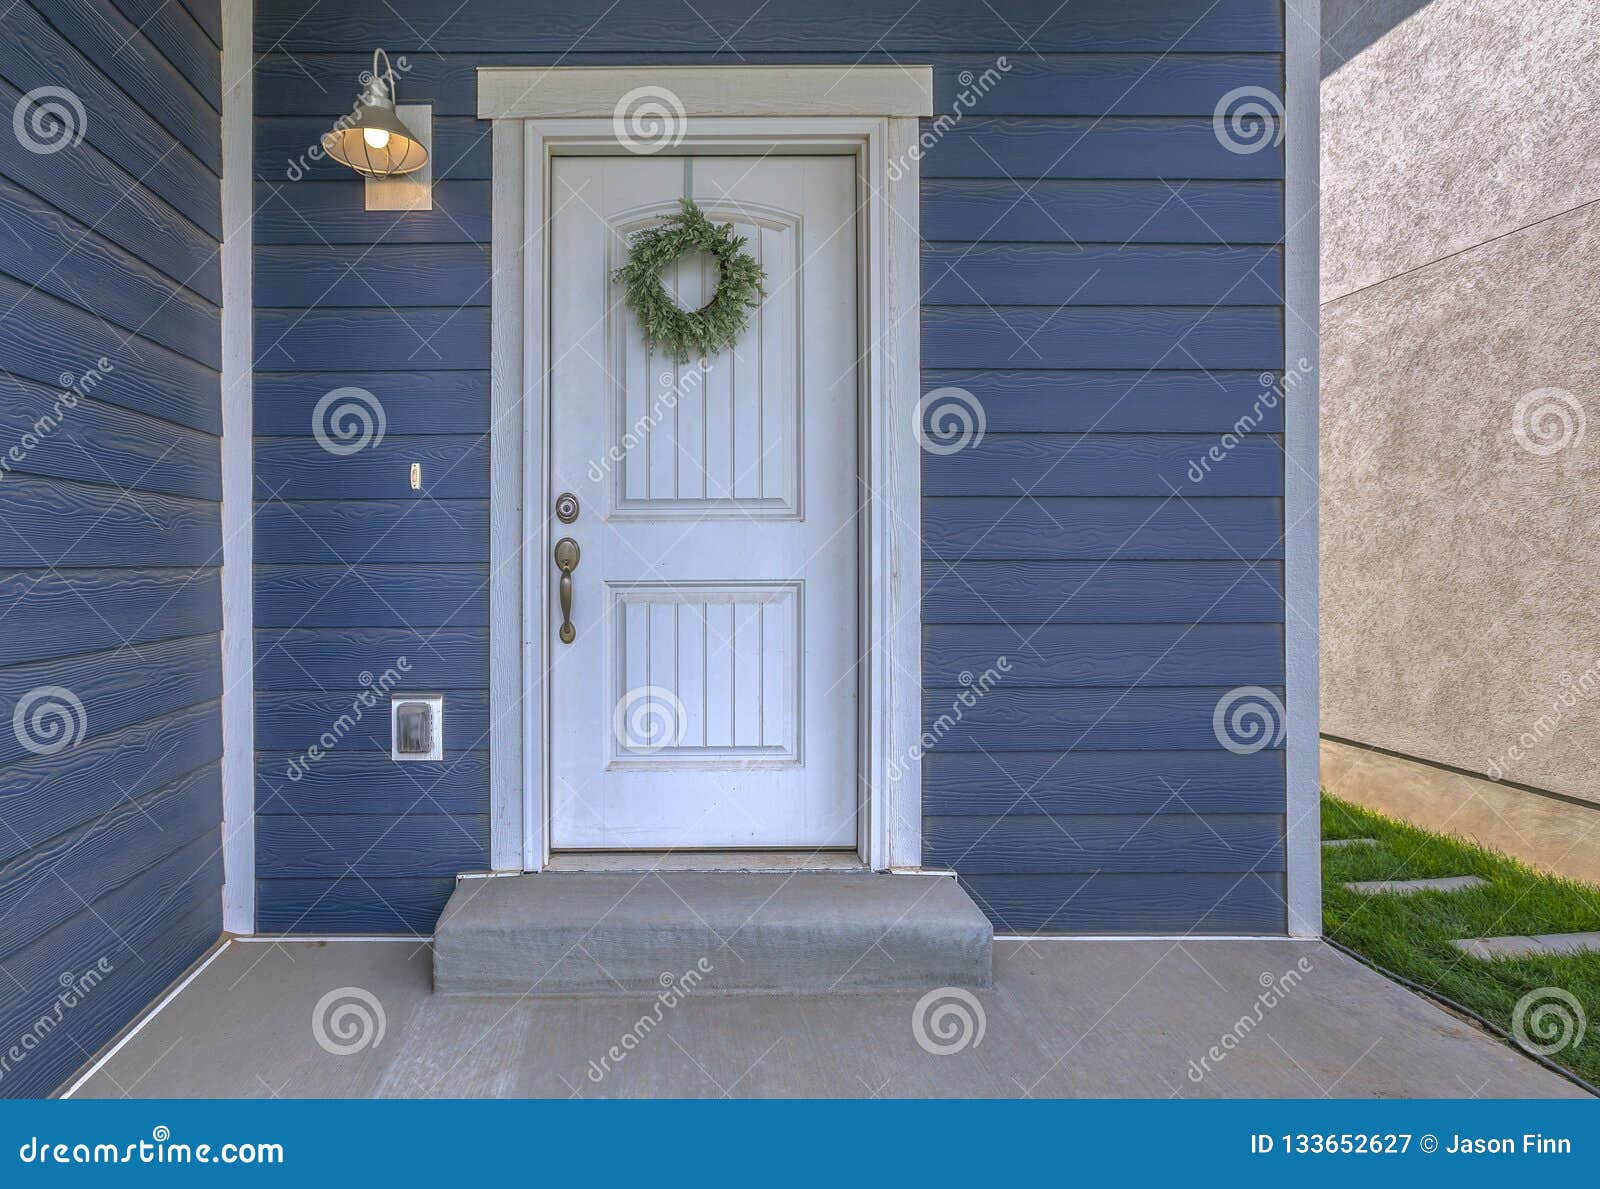 entrance of a home with blue wall and white door